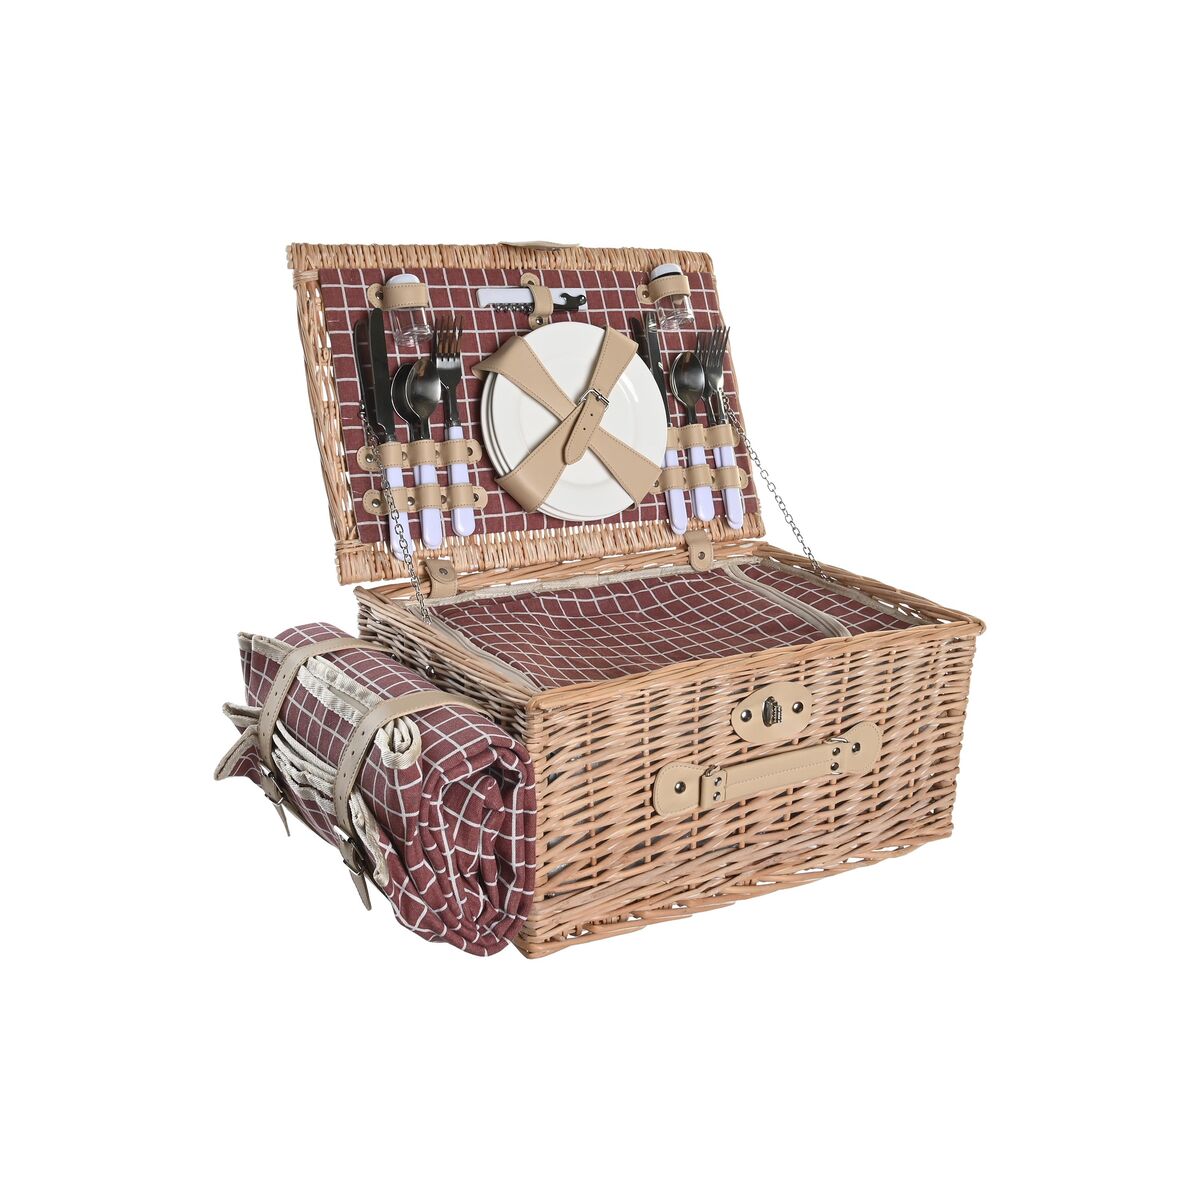 Basket DKD Home Decor Picnic Natural Red wicker (44 x 30 x 22 cm)